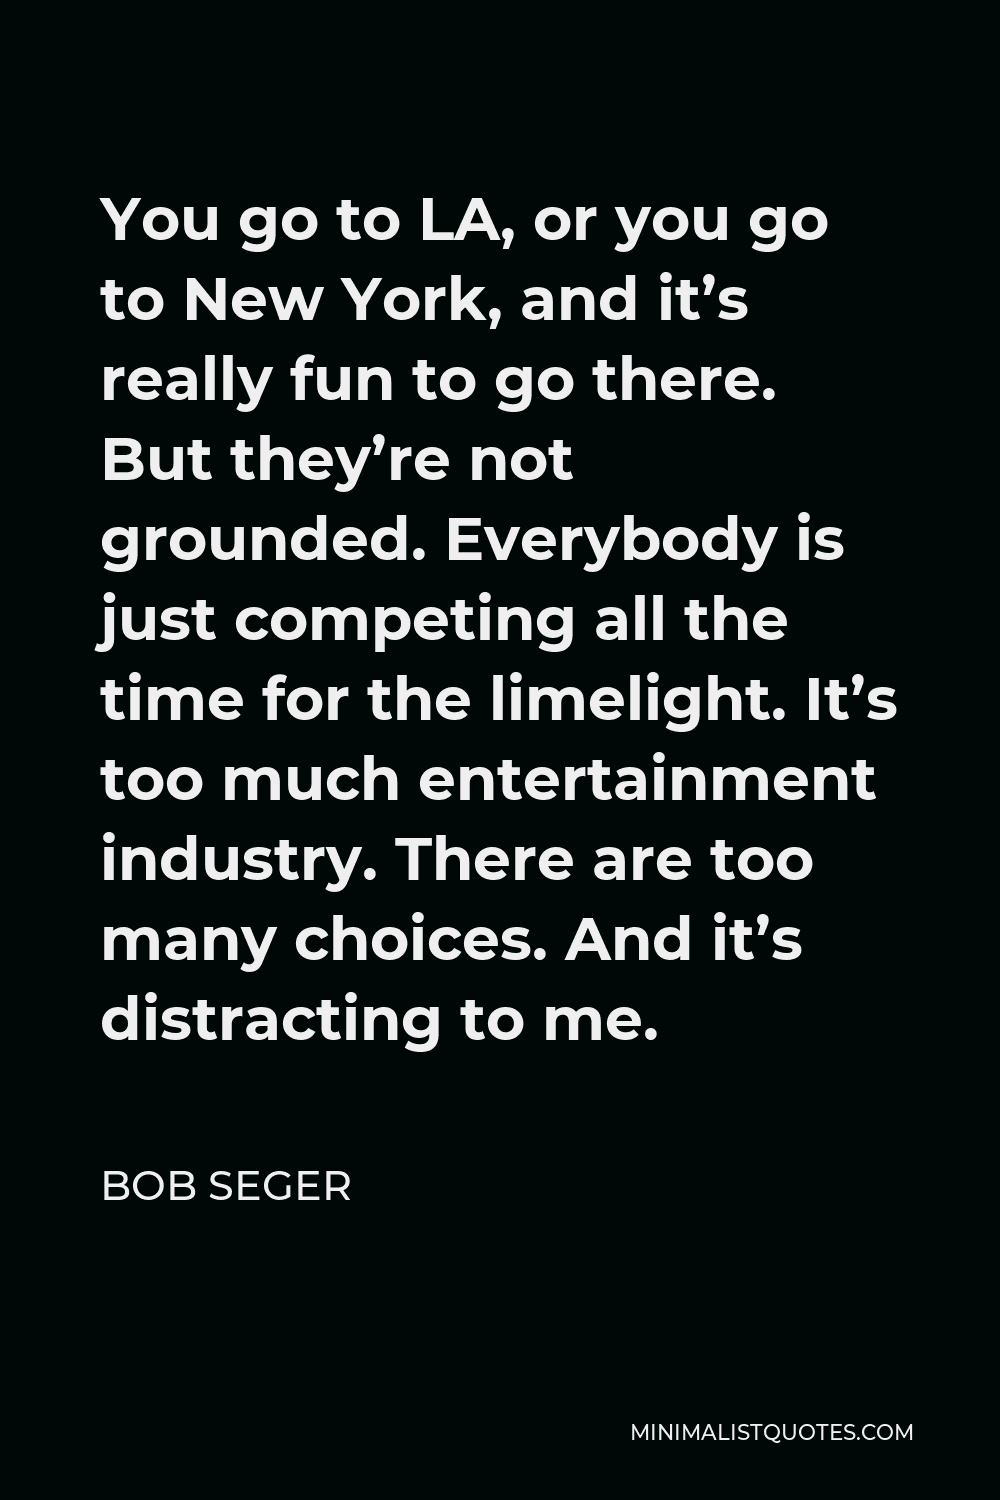 Bob Seger Quote - You go to LA, or you go to New York, and it’s really fun to go there. But they’re not grounded. Everybody is just competing all the time for the limelight. It’s too much entertainment industry. There are too many choices. And it’s distracting to me.